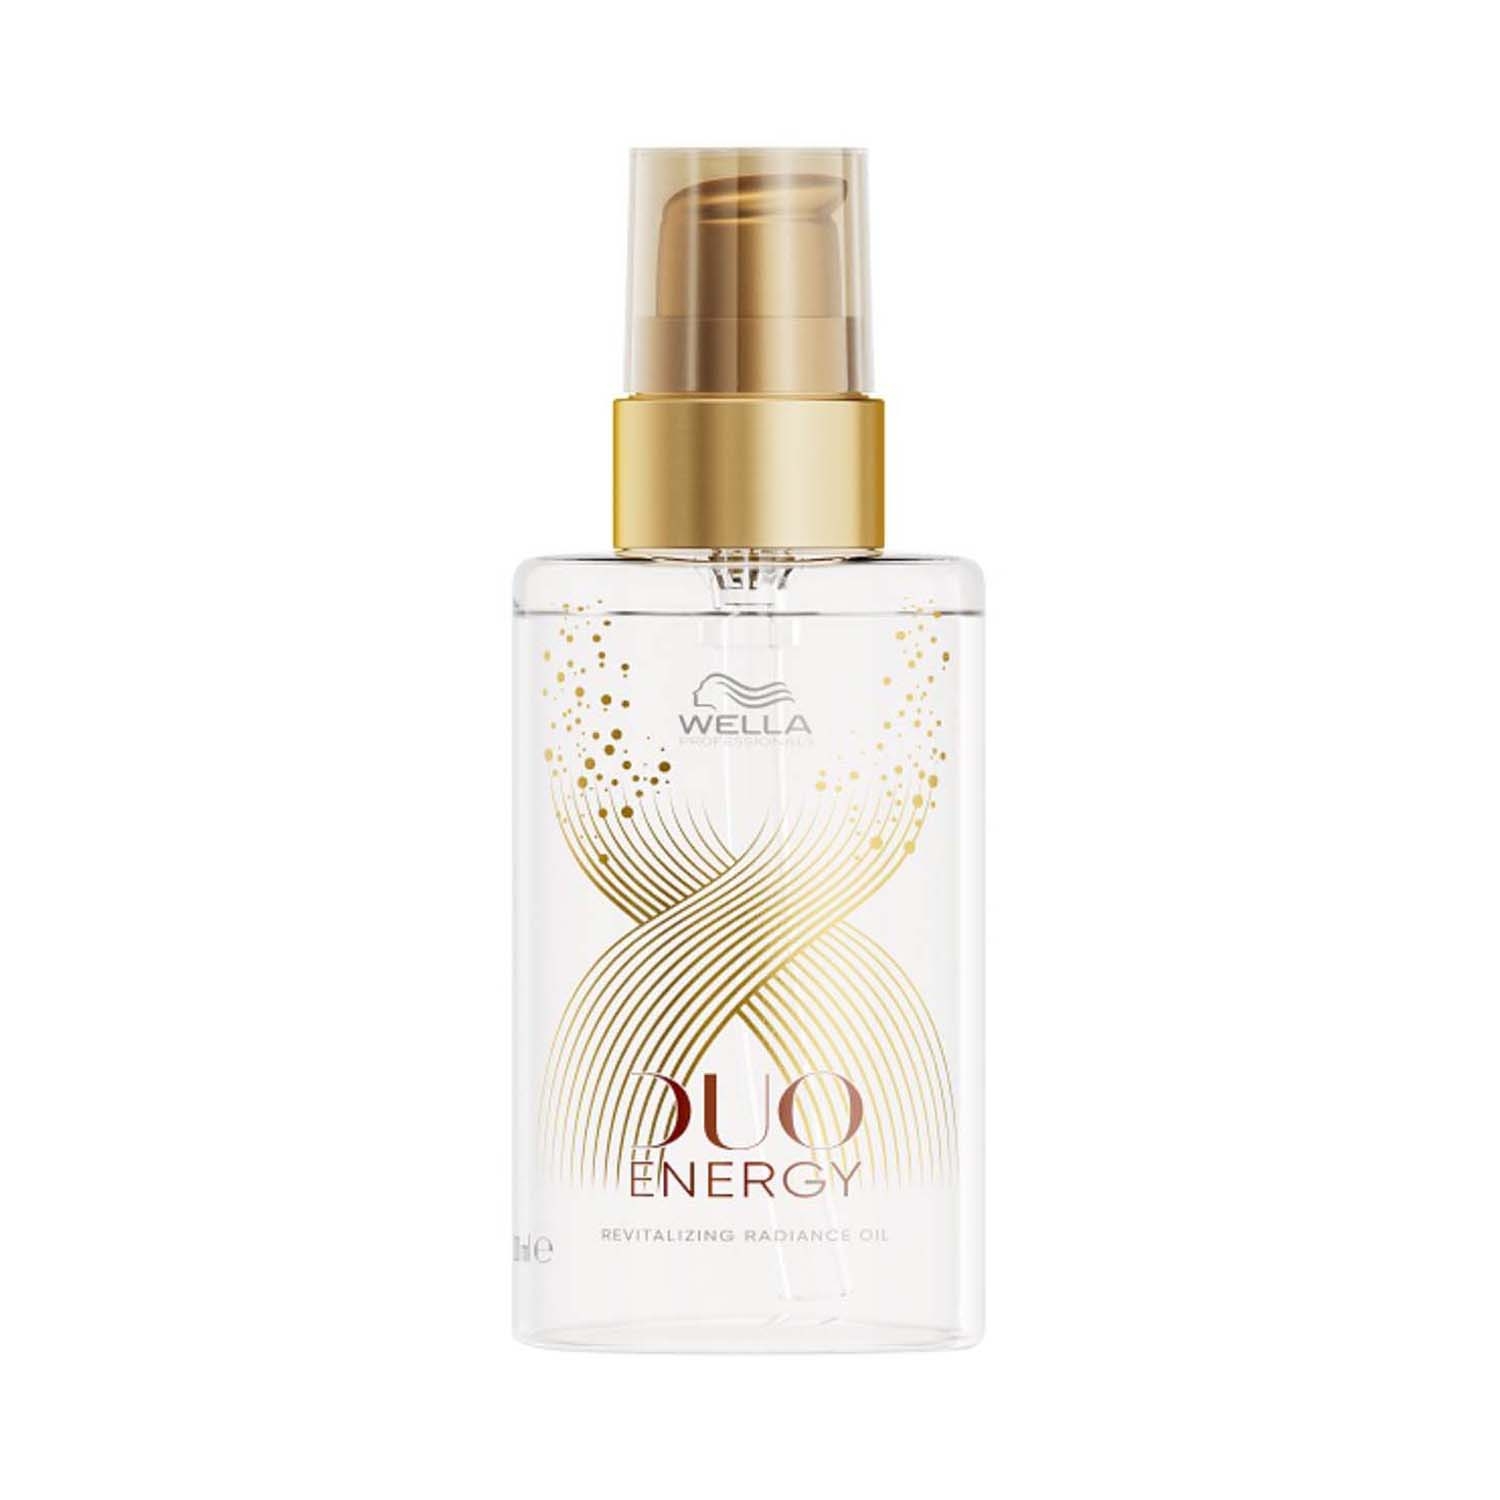 Wella Professionals | Wella Professionals Duo Energy Revitalizing Radiance Hair Oil (100ml)